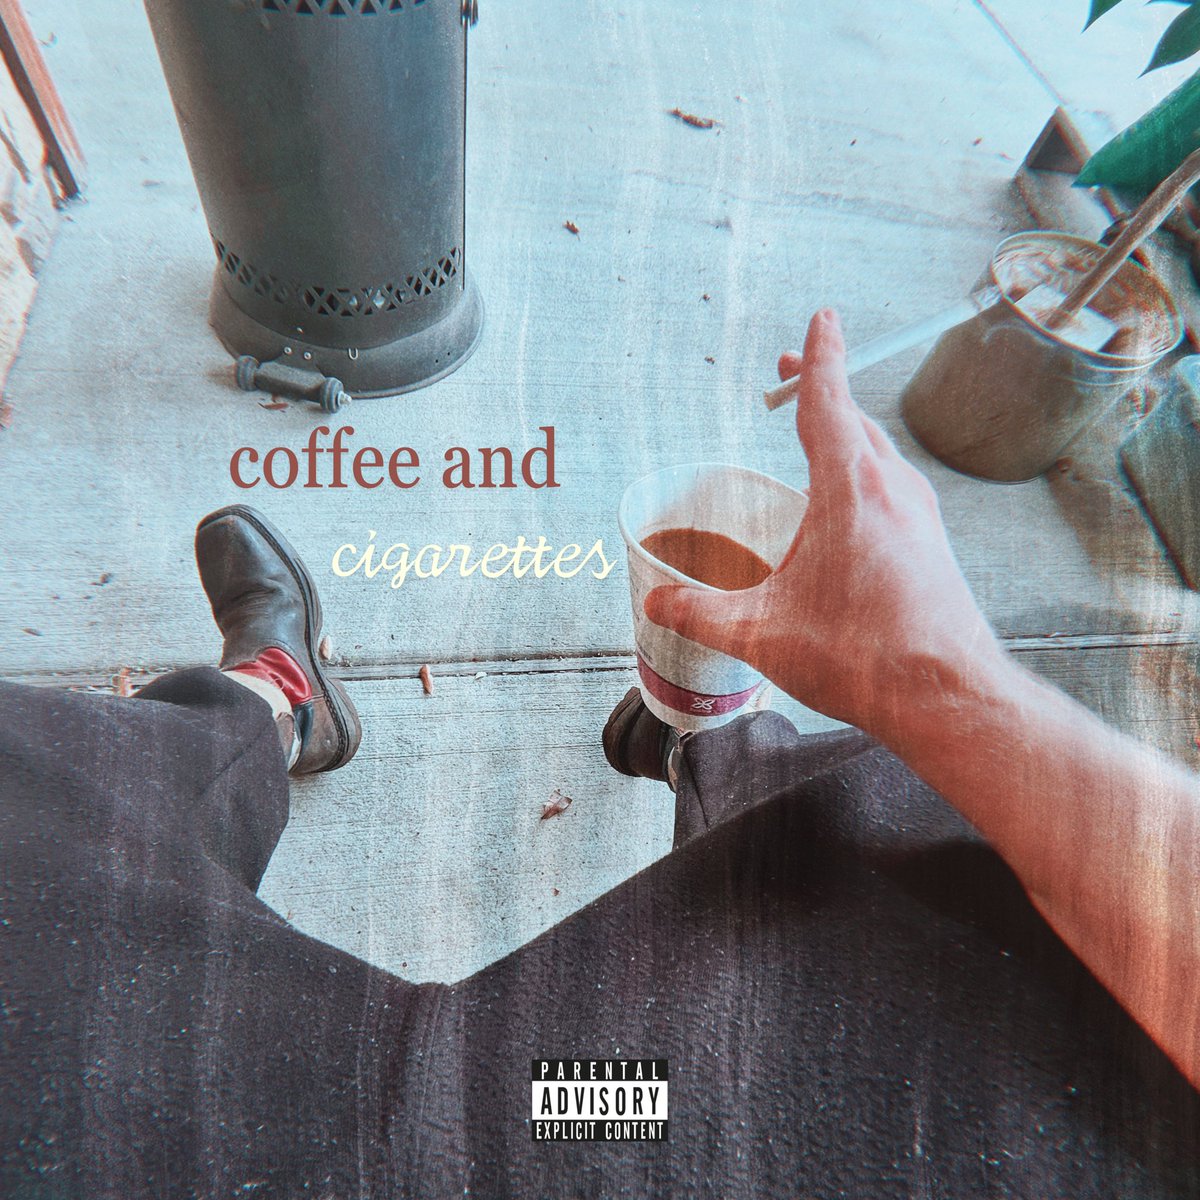 good morning ☀️ my 6 track LP tape dropped titled ‘coffee and cigarettes’ (link in comments)